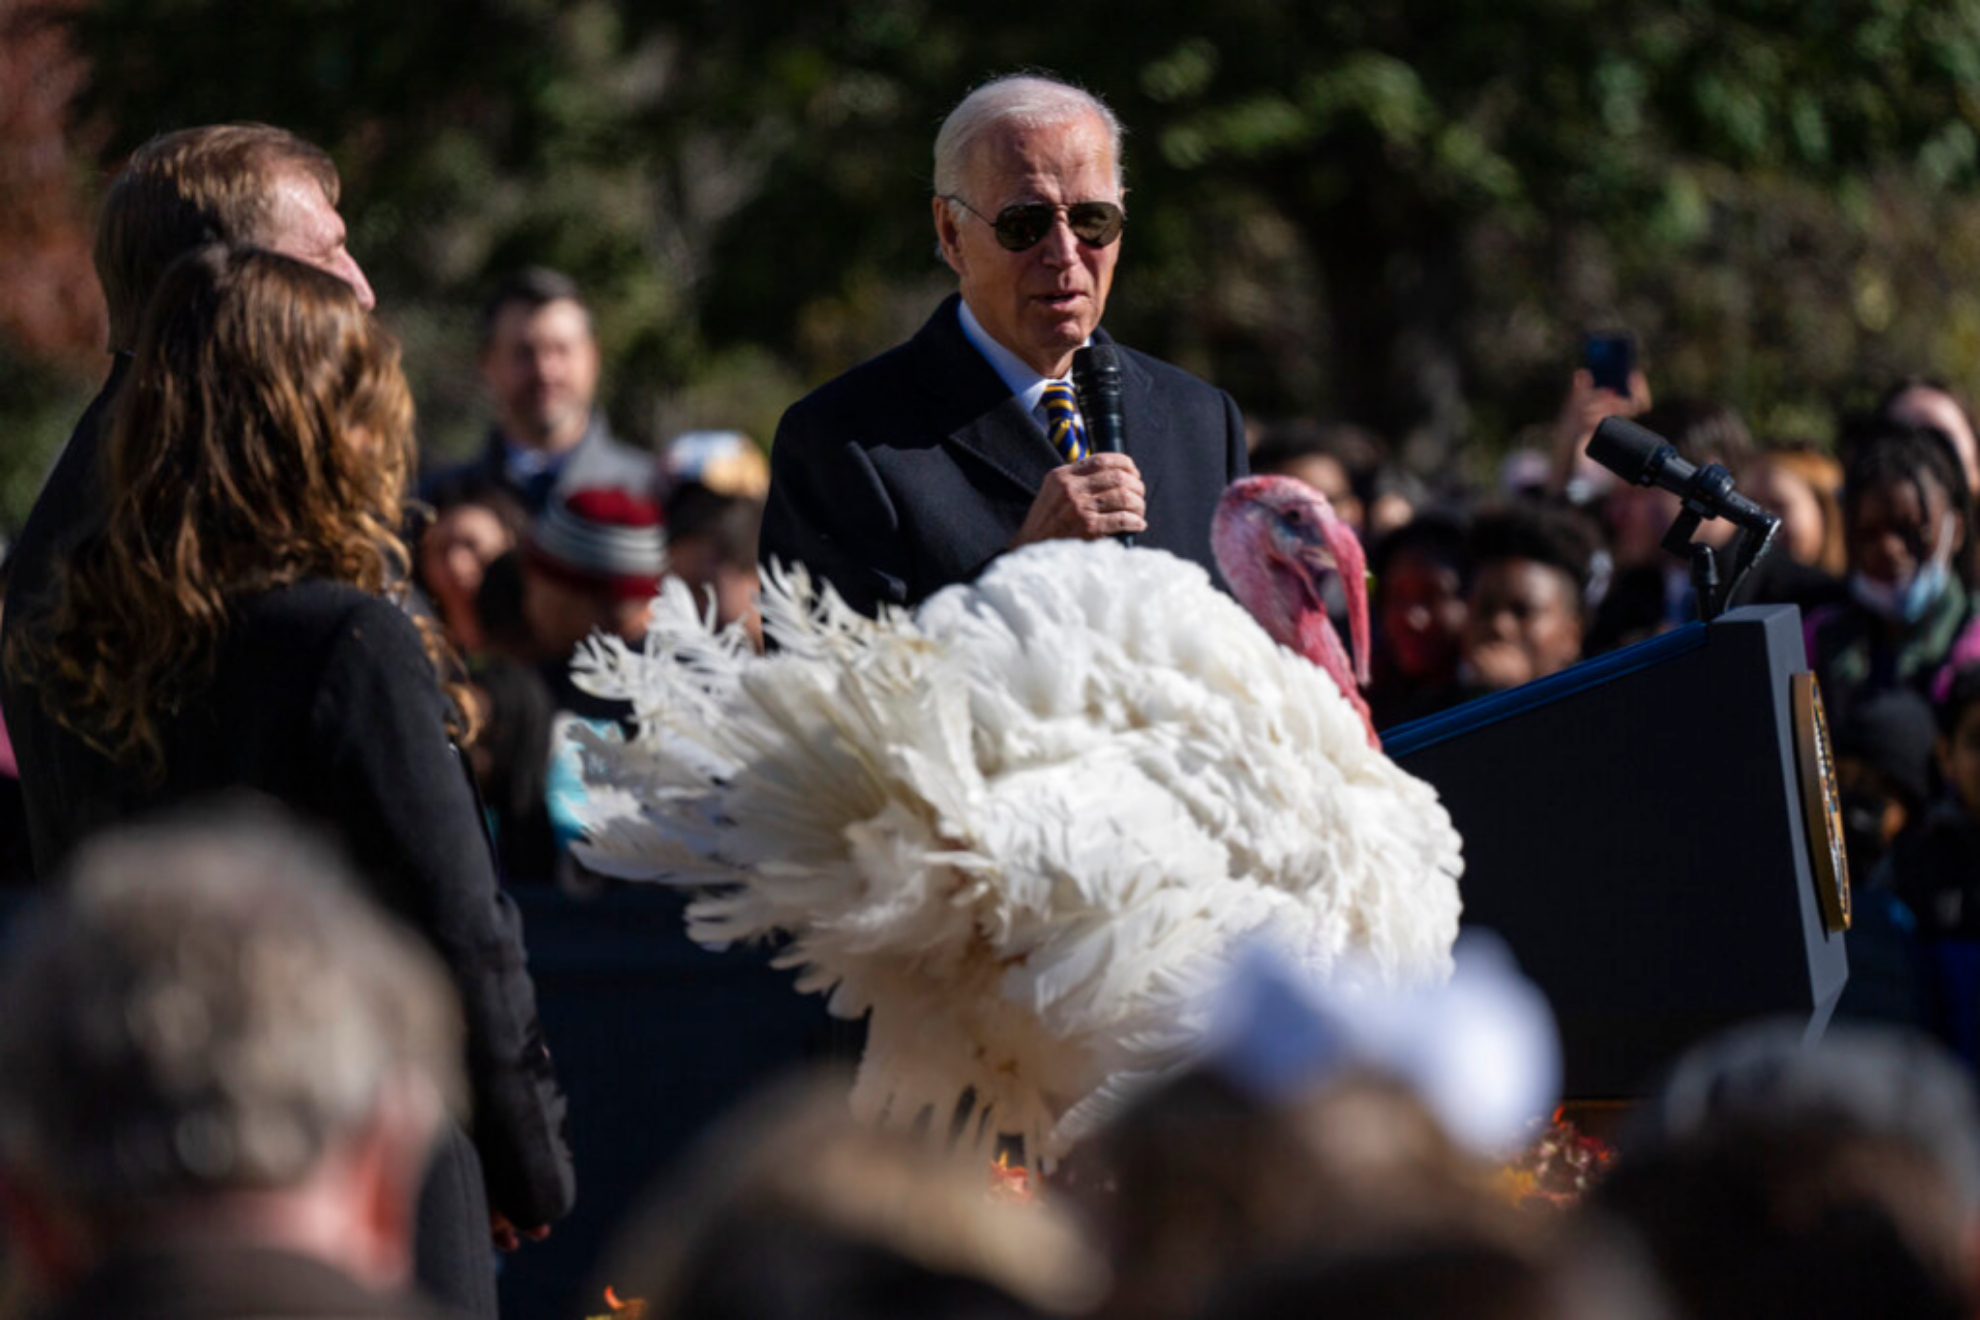 Biden at the Thanksgiving opening ceremony on the White House lawn.